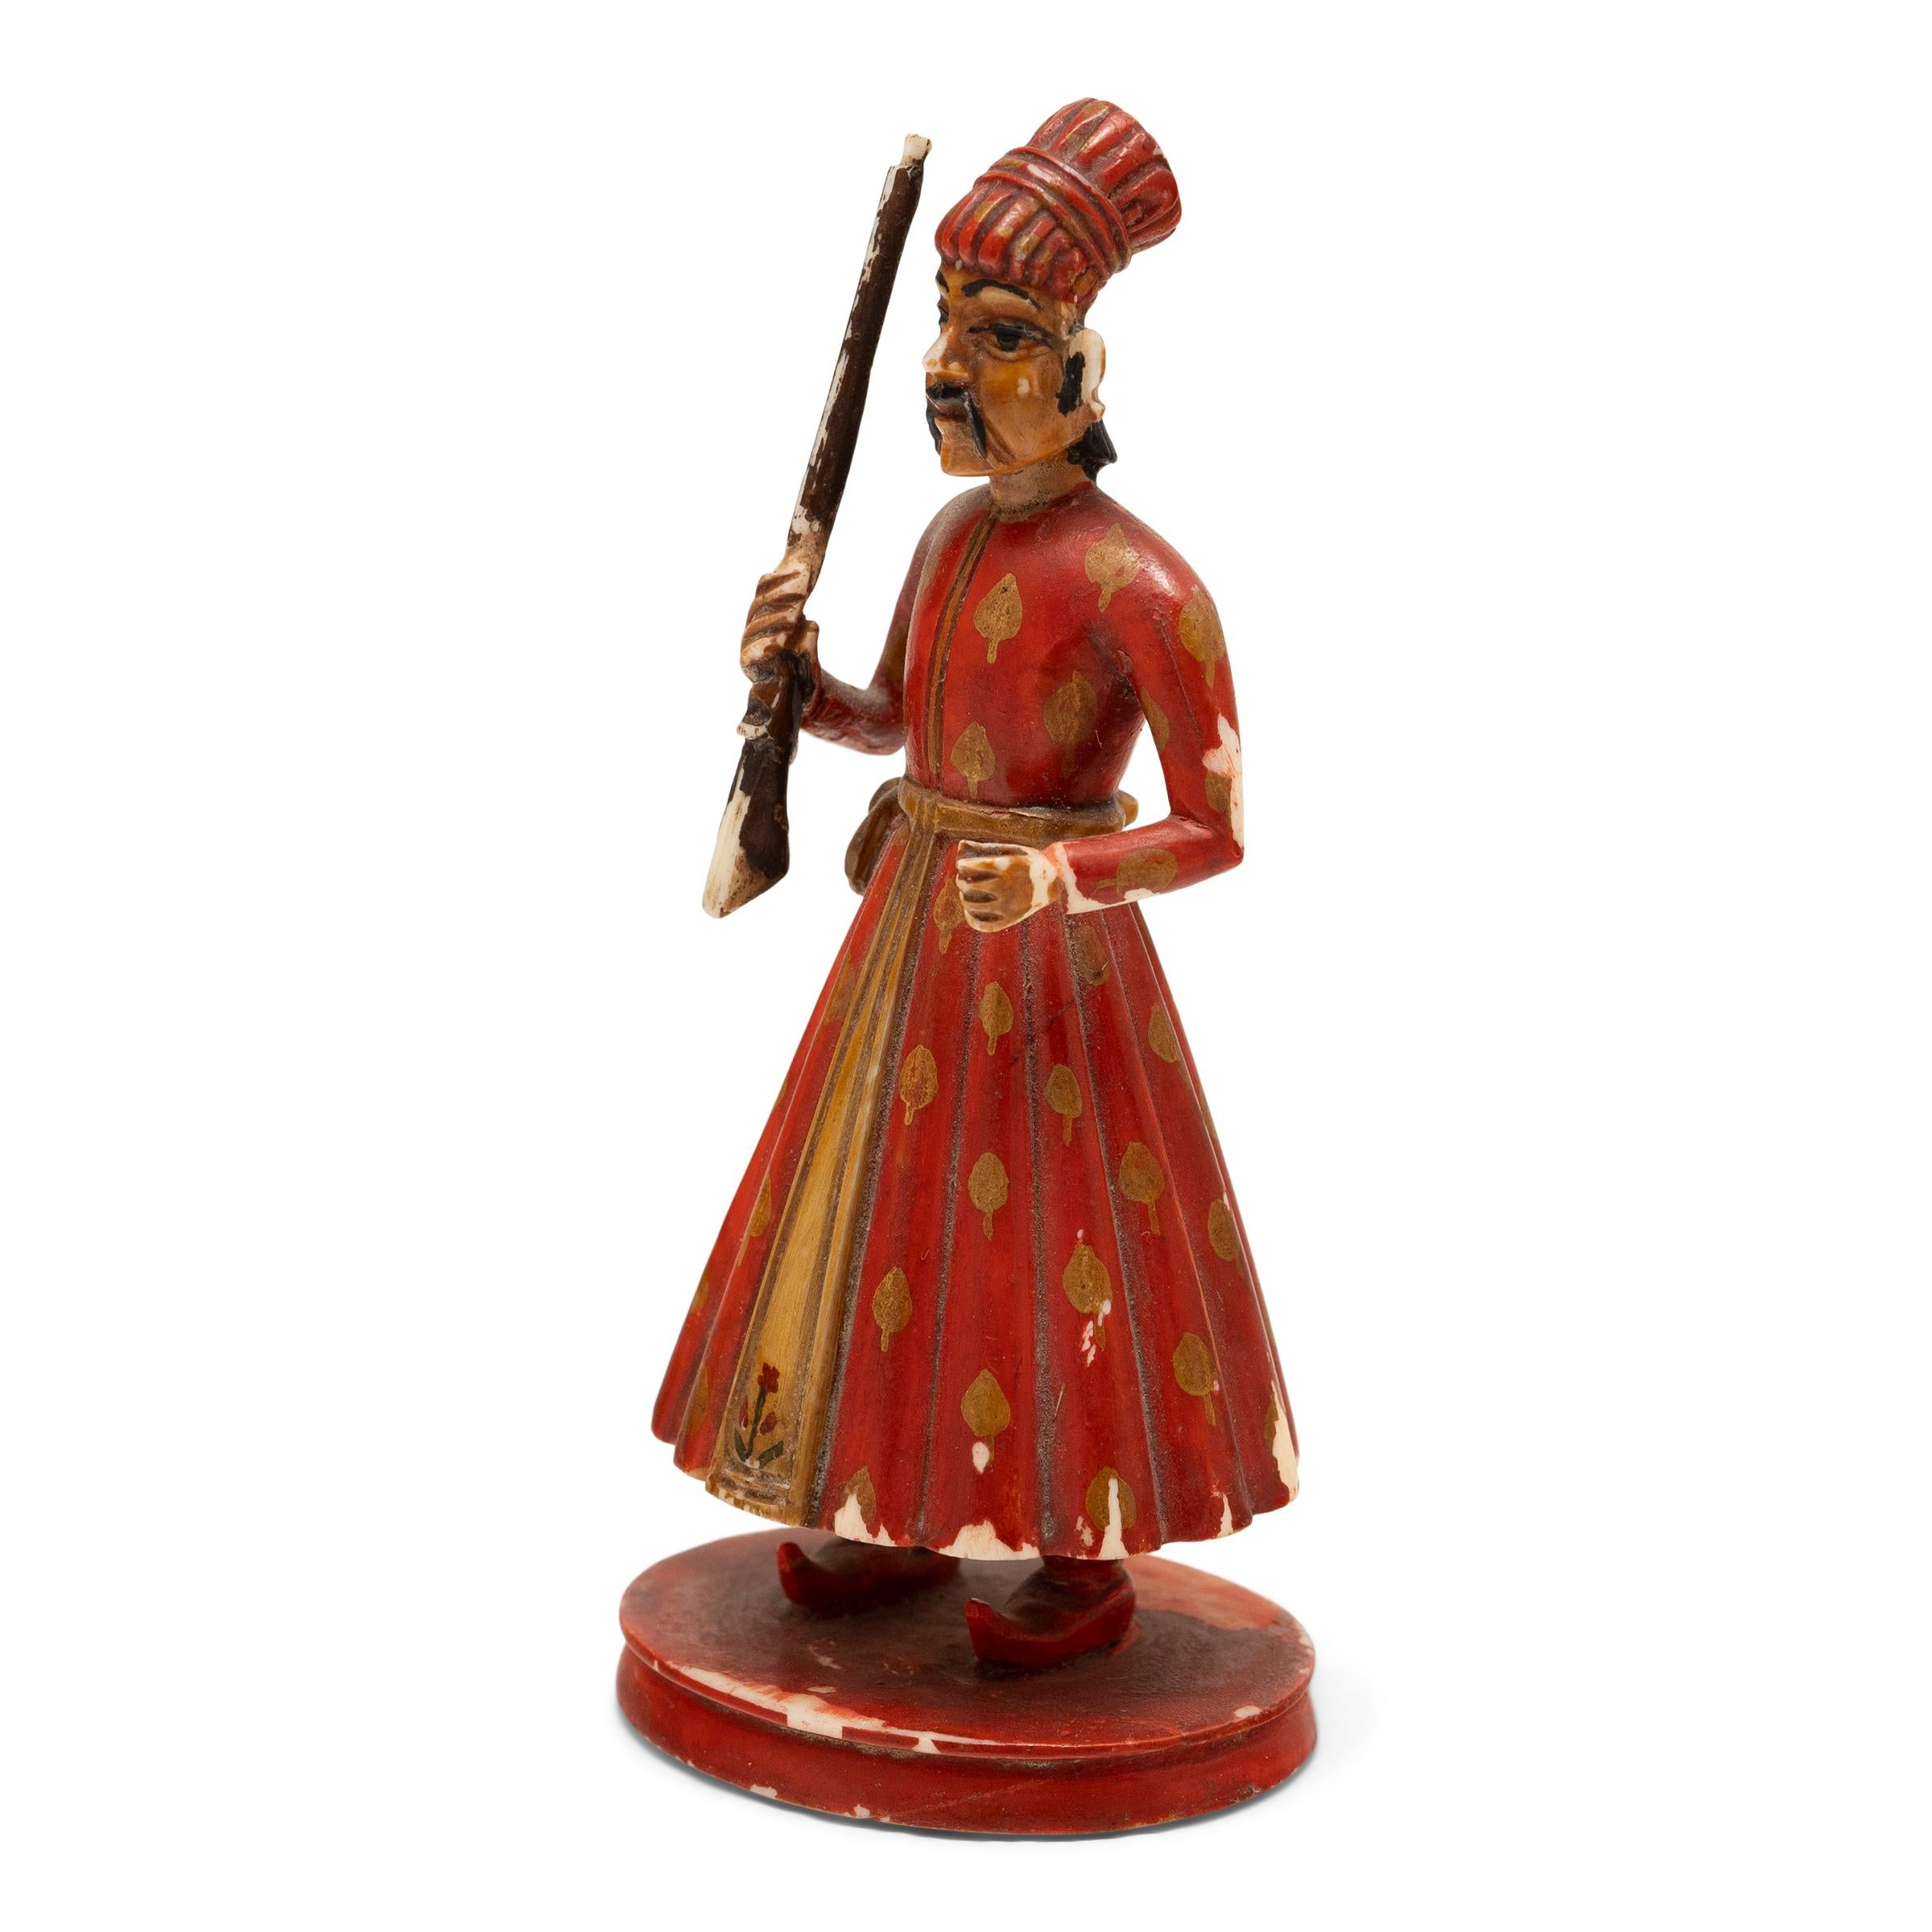 This early 20th century figurine is hand-carved of bone to depict an Indian soldier holding a musket rifle. Modeled after Sowar cavalrymen who served under the British East India Company, the petite figure is dressed in long robes painted with deep